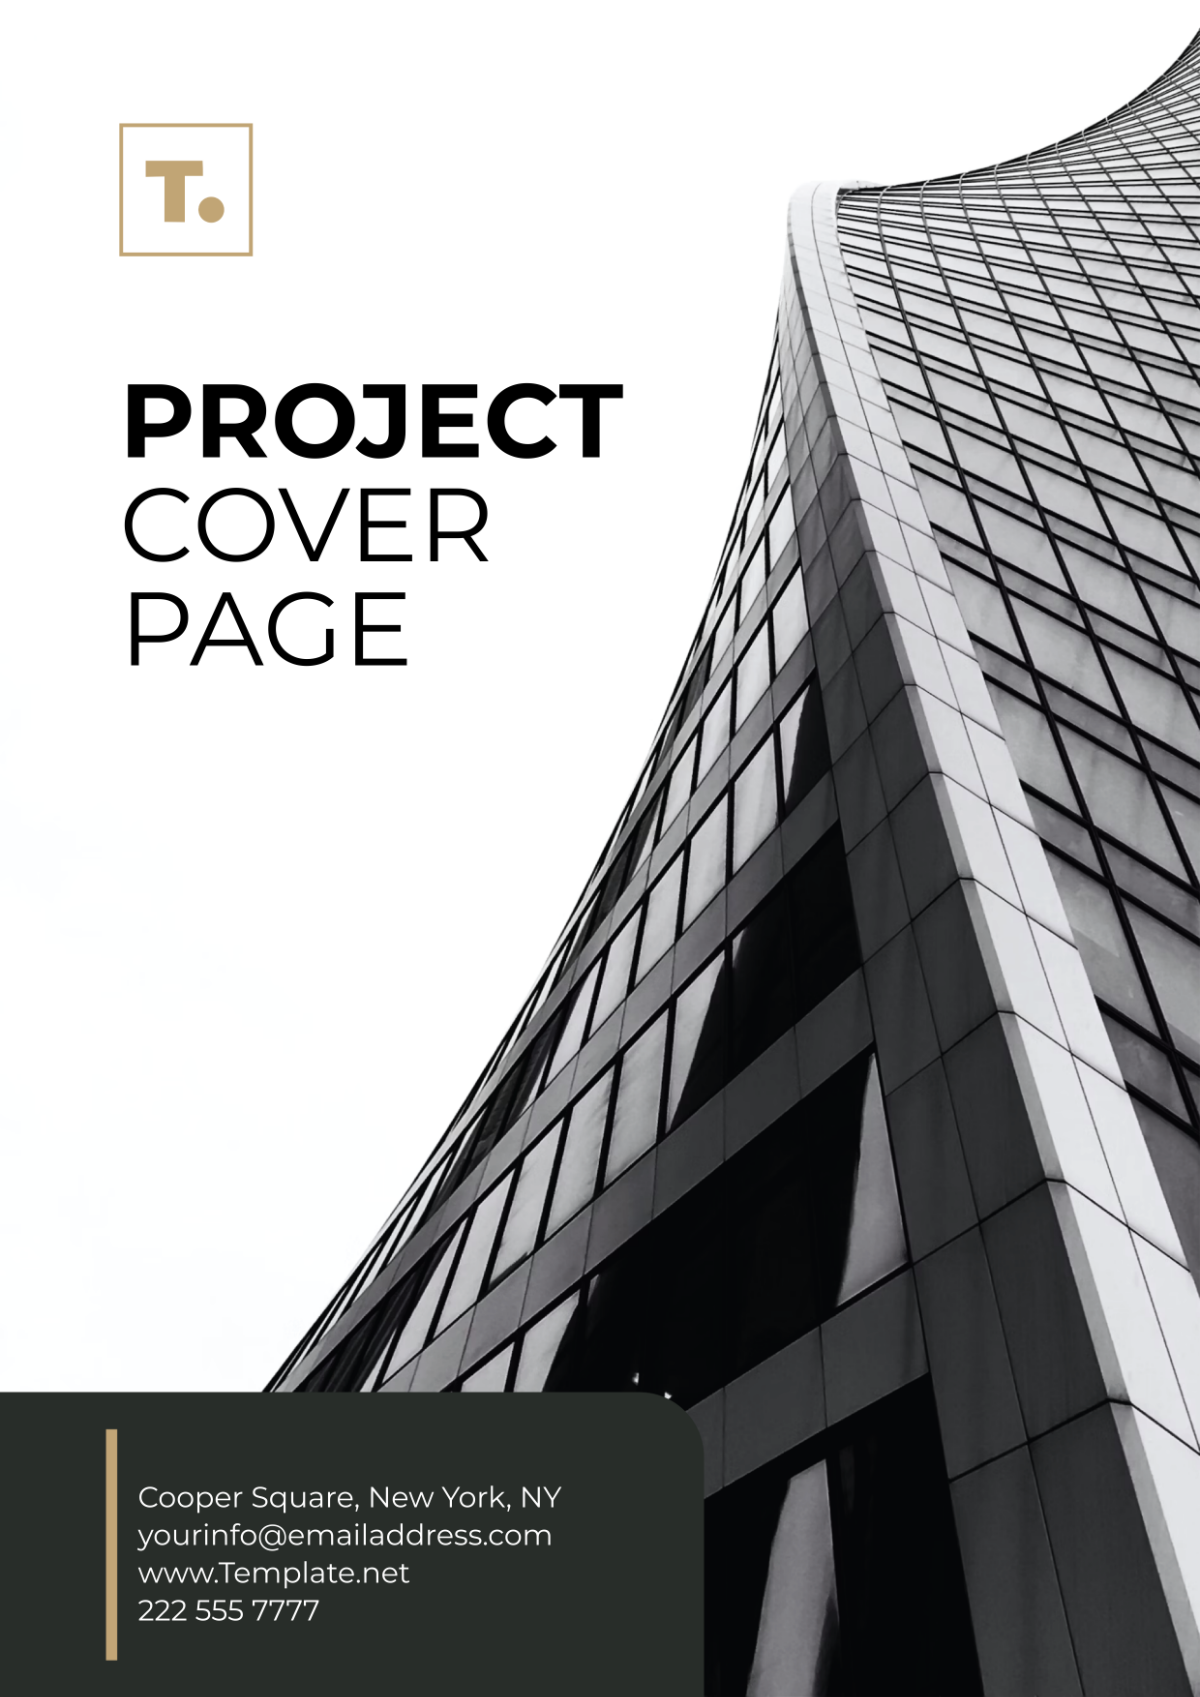 Project Cover Page